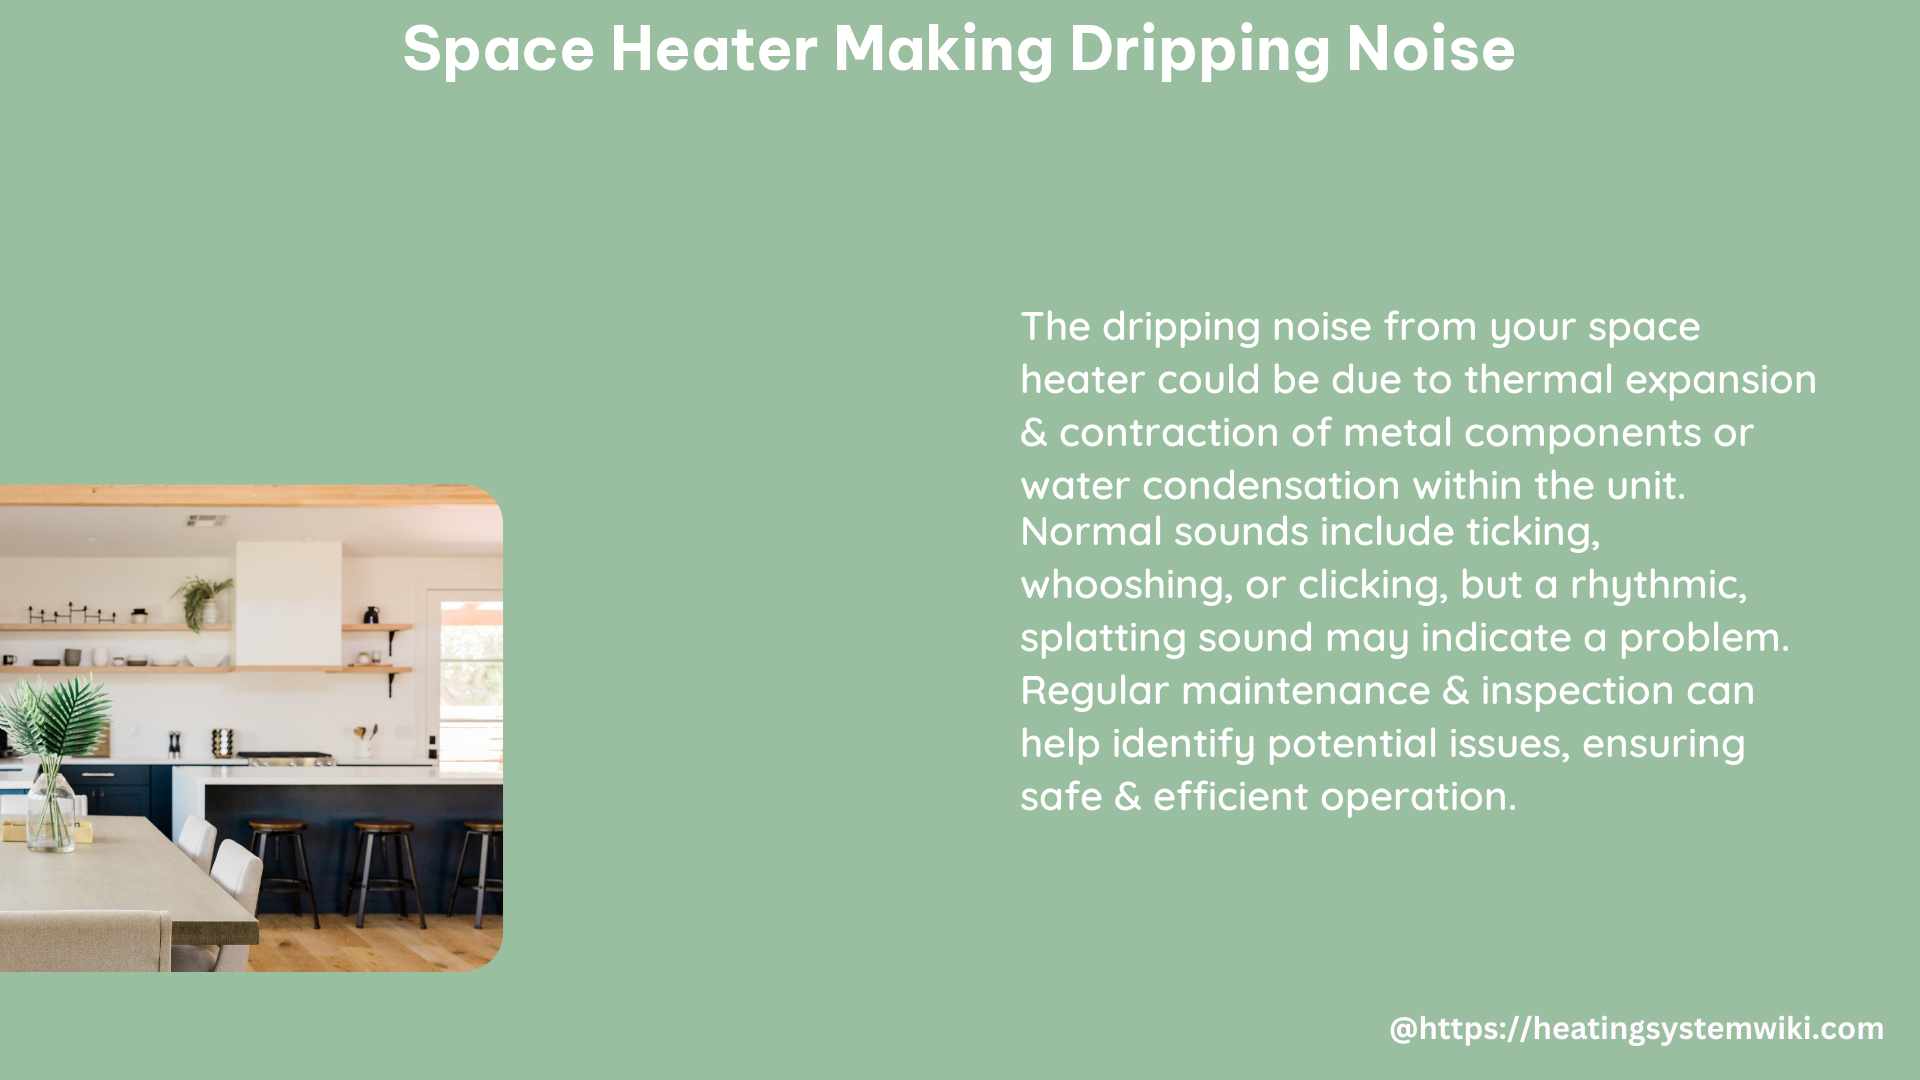 space heater making dripping noise